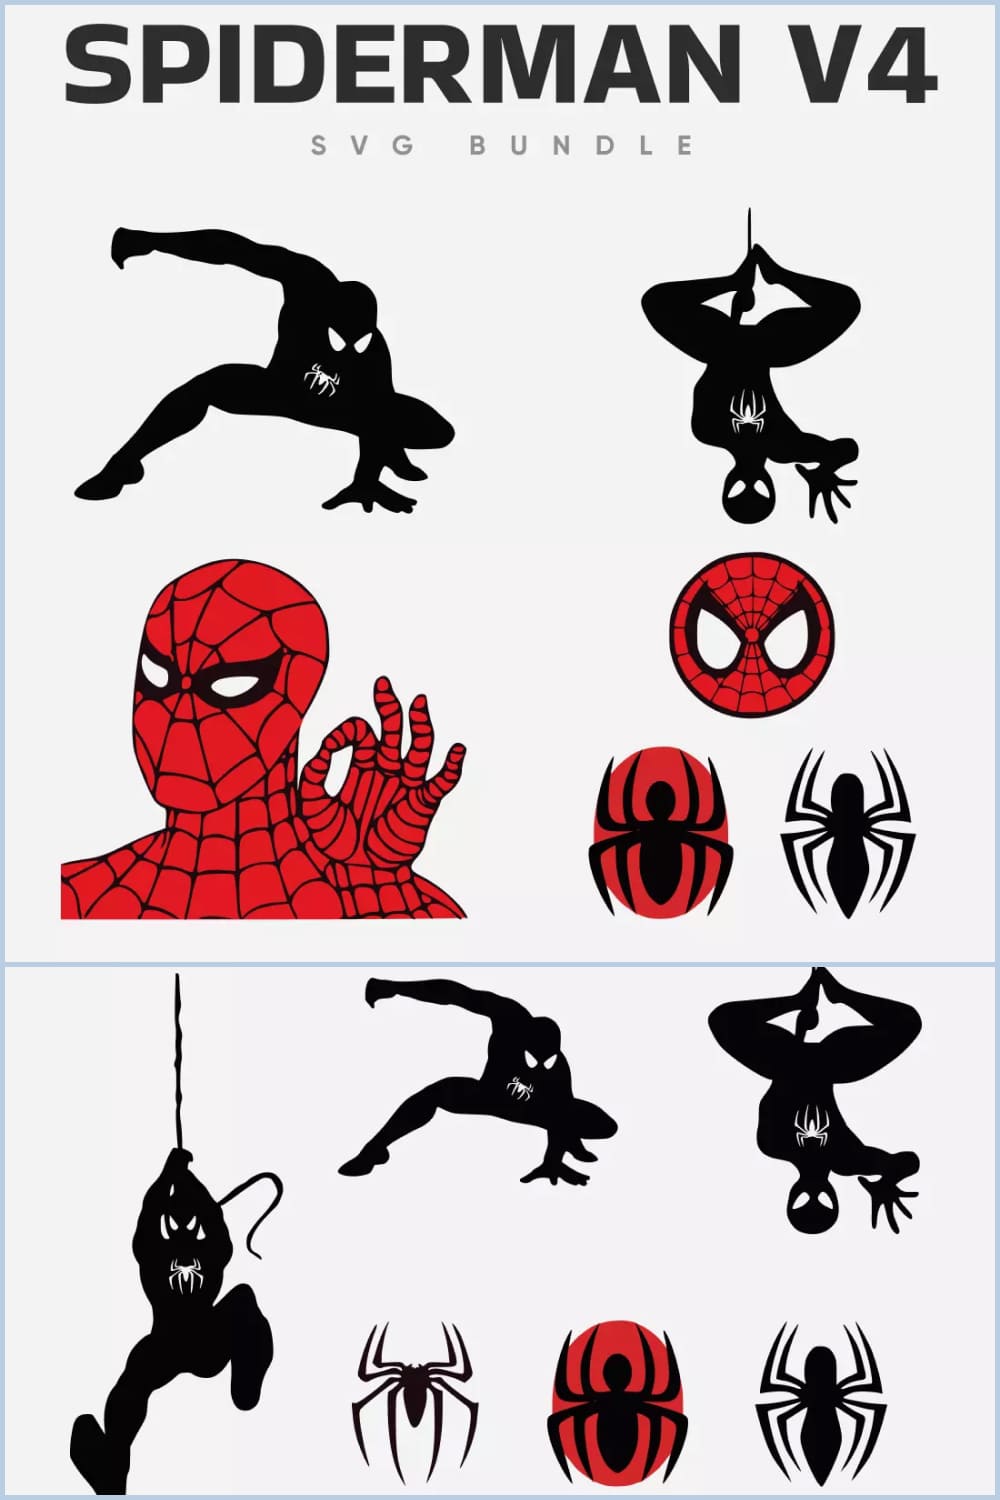 Spiderman faces and silhouettes.